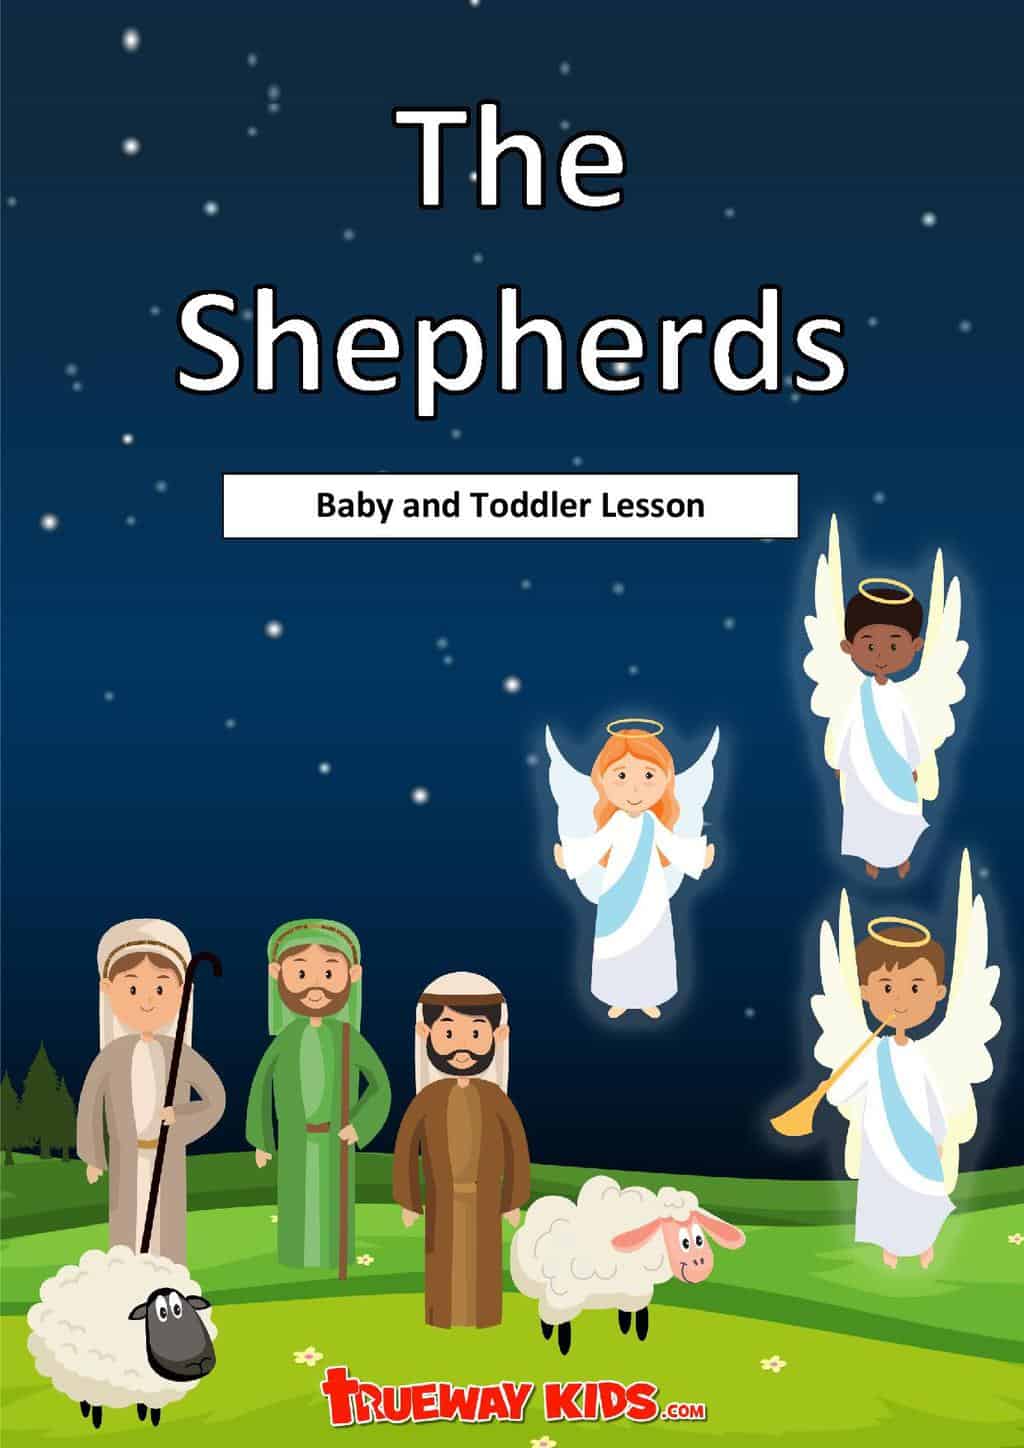 Free printbale preschool Bible lesson on the Christmas Shepherds. Learn about the candy cane and explore the Bible passage with worksheets, games, Bible activities, coloring sheets and more